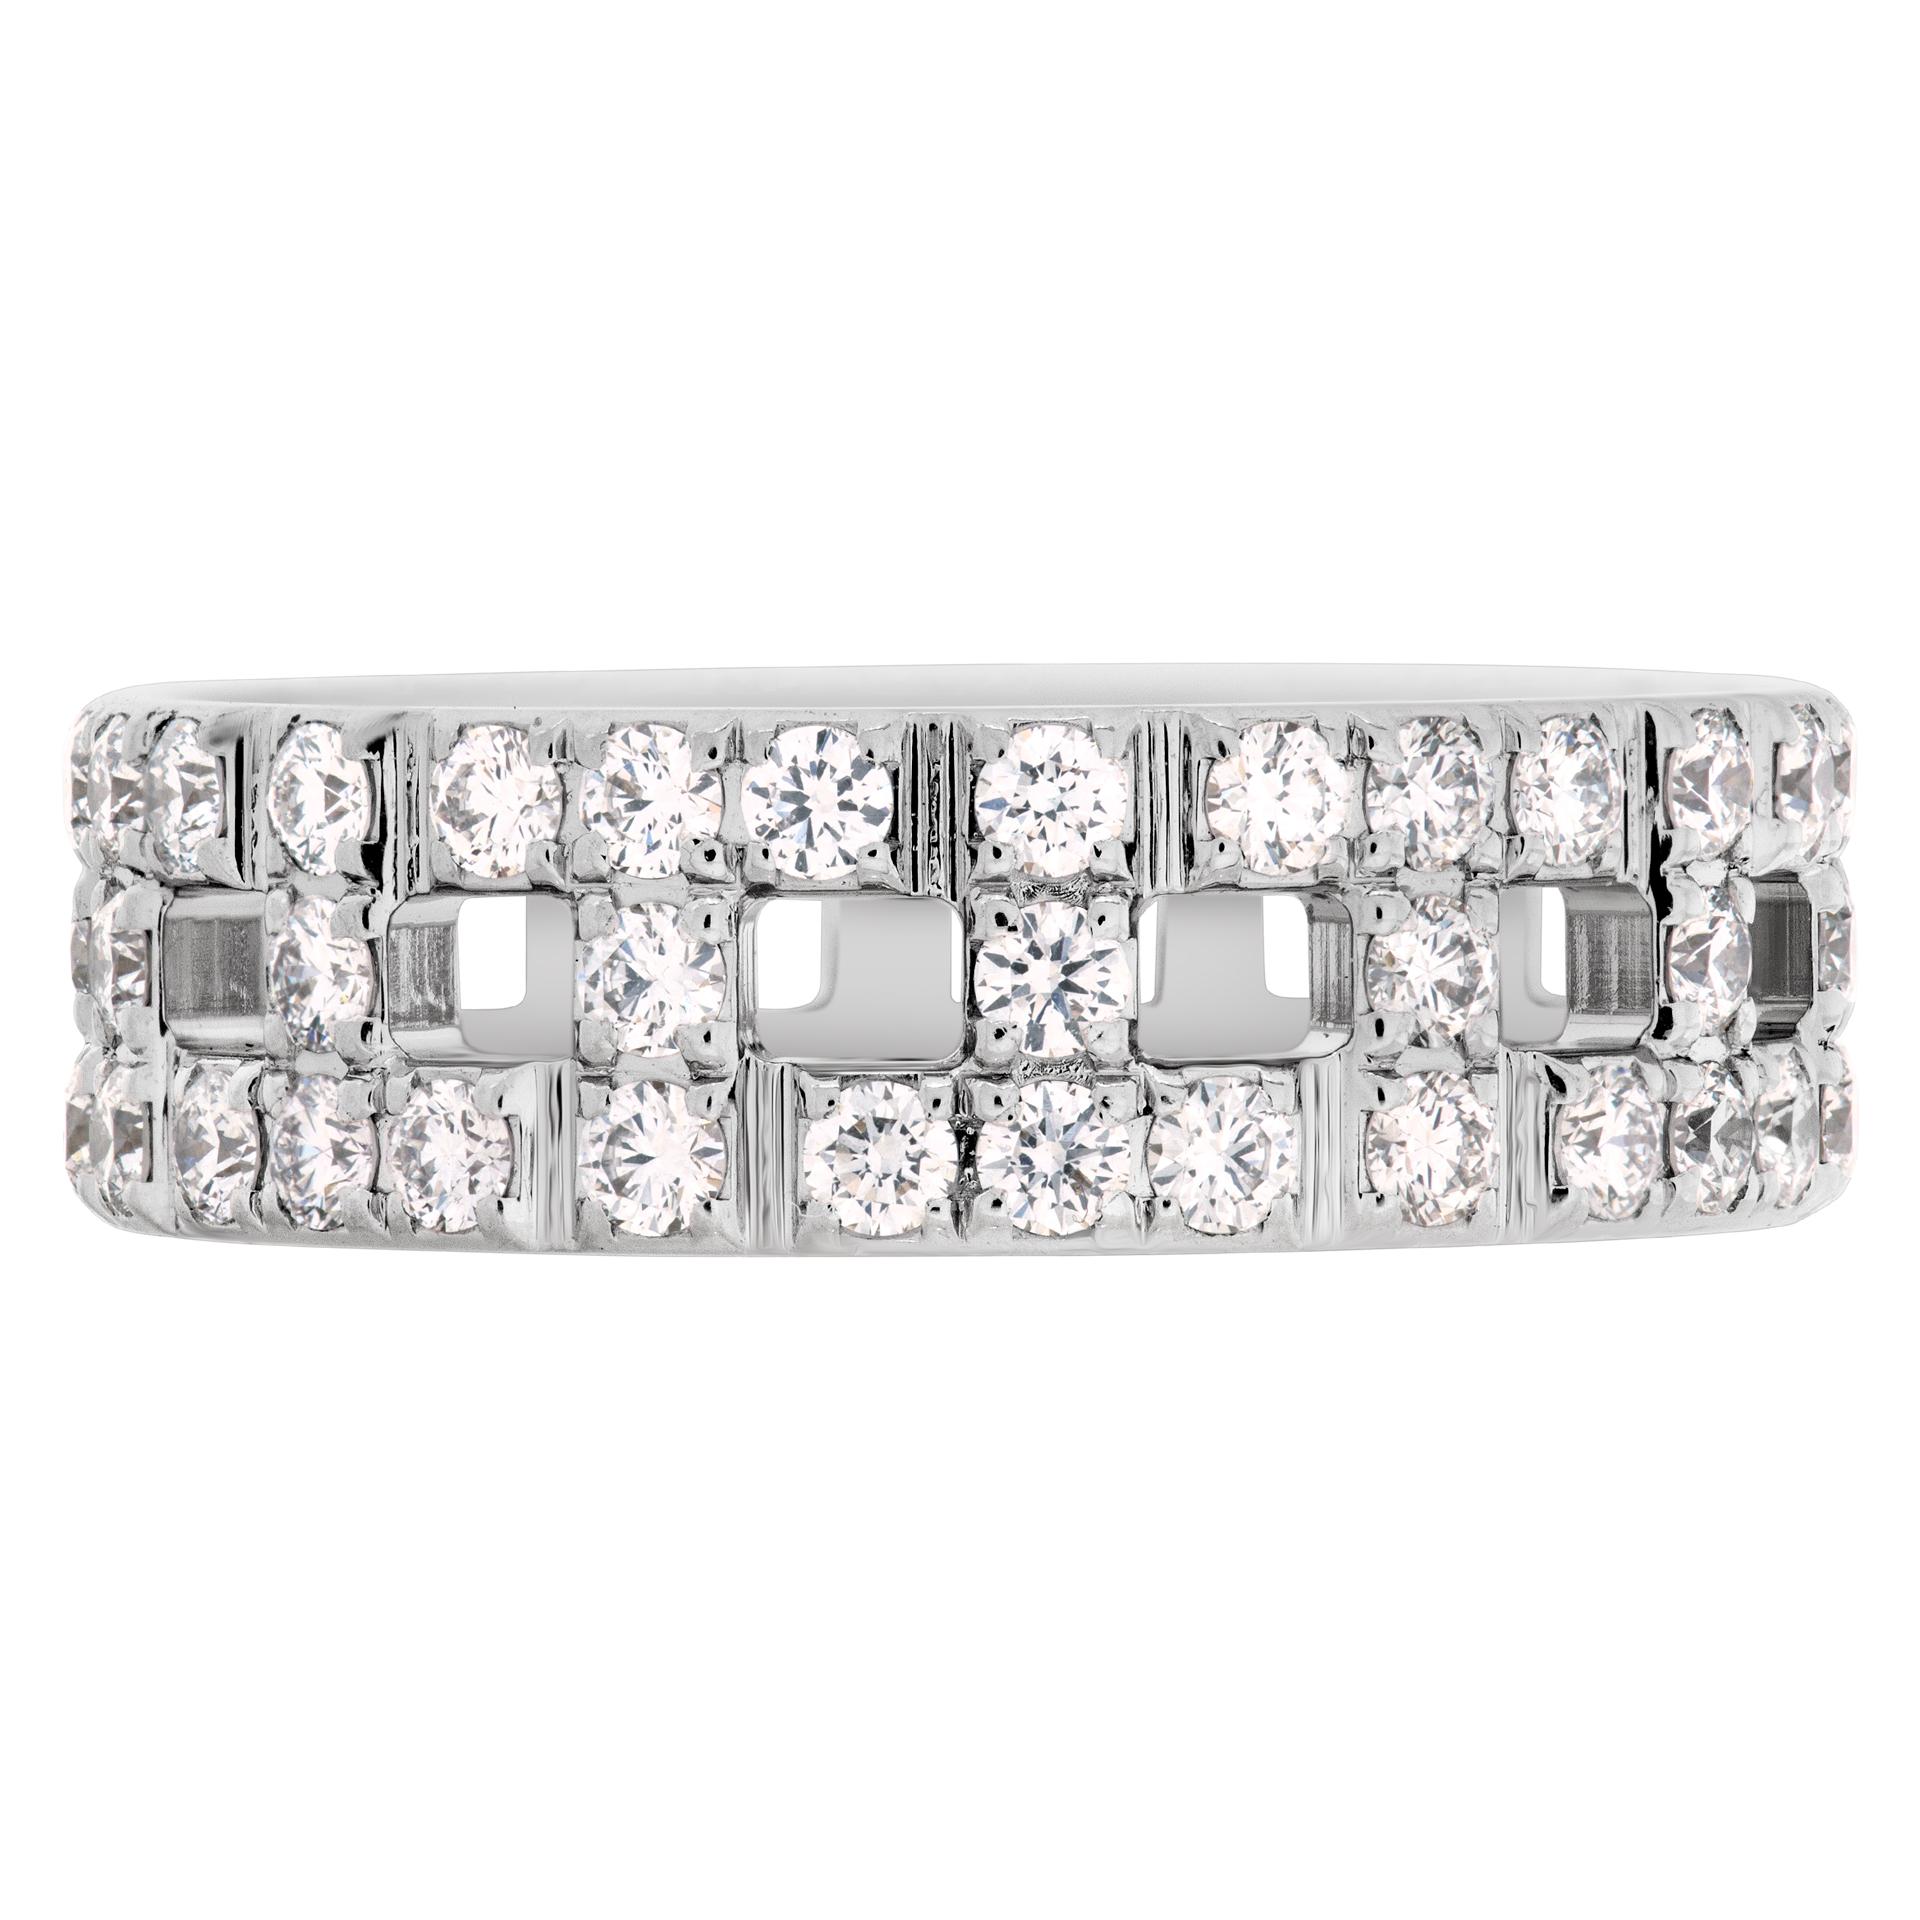 Tiffany & Co. True T wide ring; alternating links of letter T traced in striking pavé diamonds with 0.86 carat full cut round brilliant diamonds, set in 18k white gold. 025 inches wide- Size 5  This Tiffany & Co. ring is currently size 5 and some